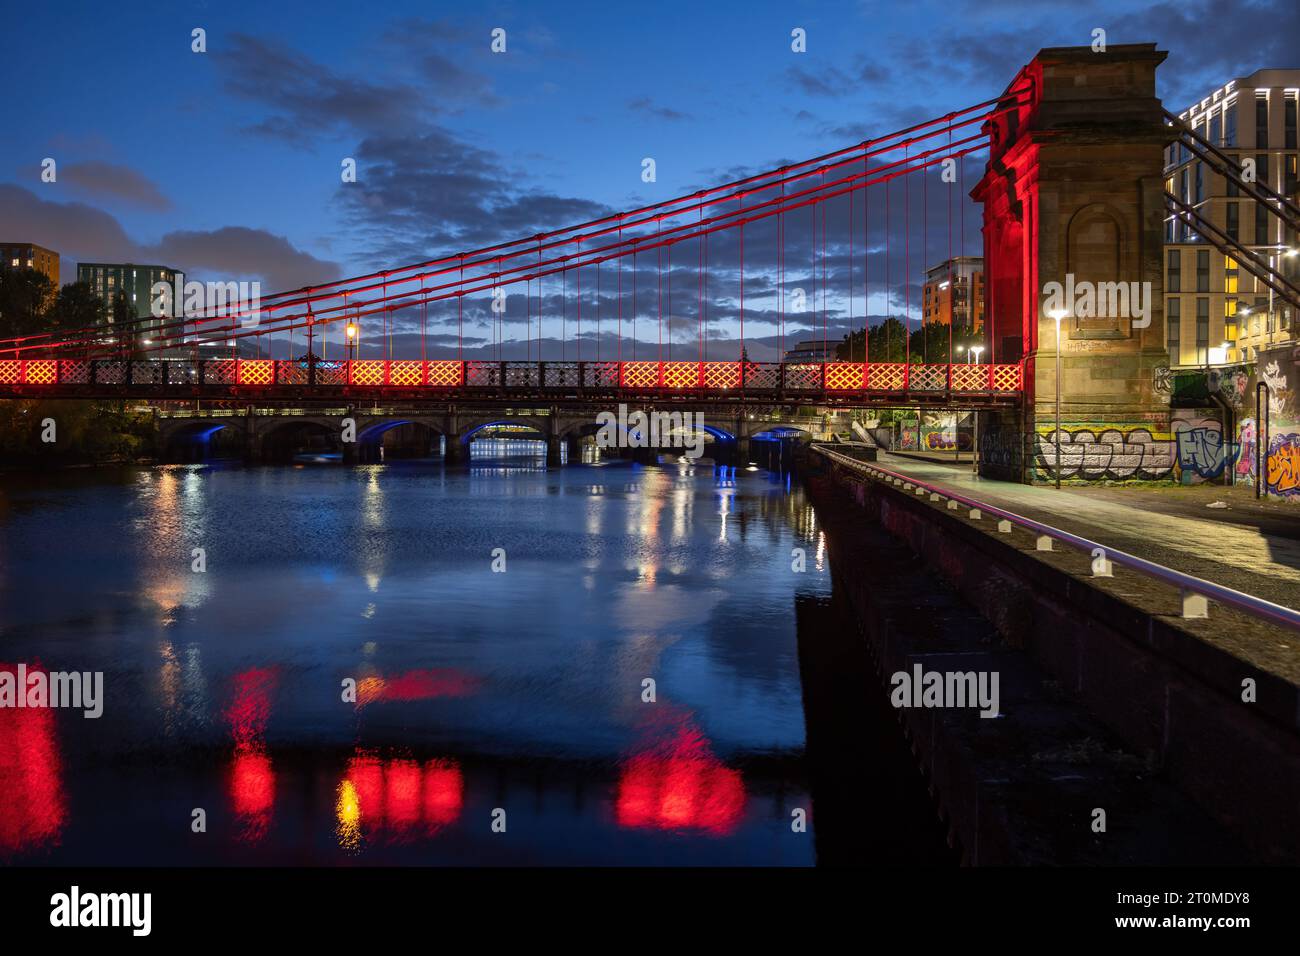 The South Portland Street Suspension Bridge at night, footbridge across the River Clyde in city of Glasgow, Scotland, UK. Stock Photo